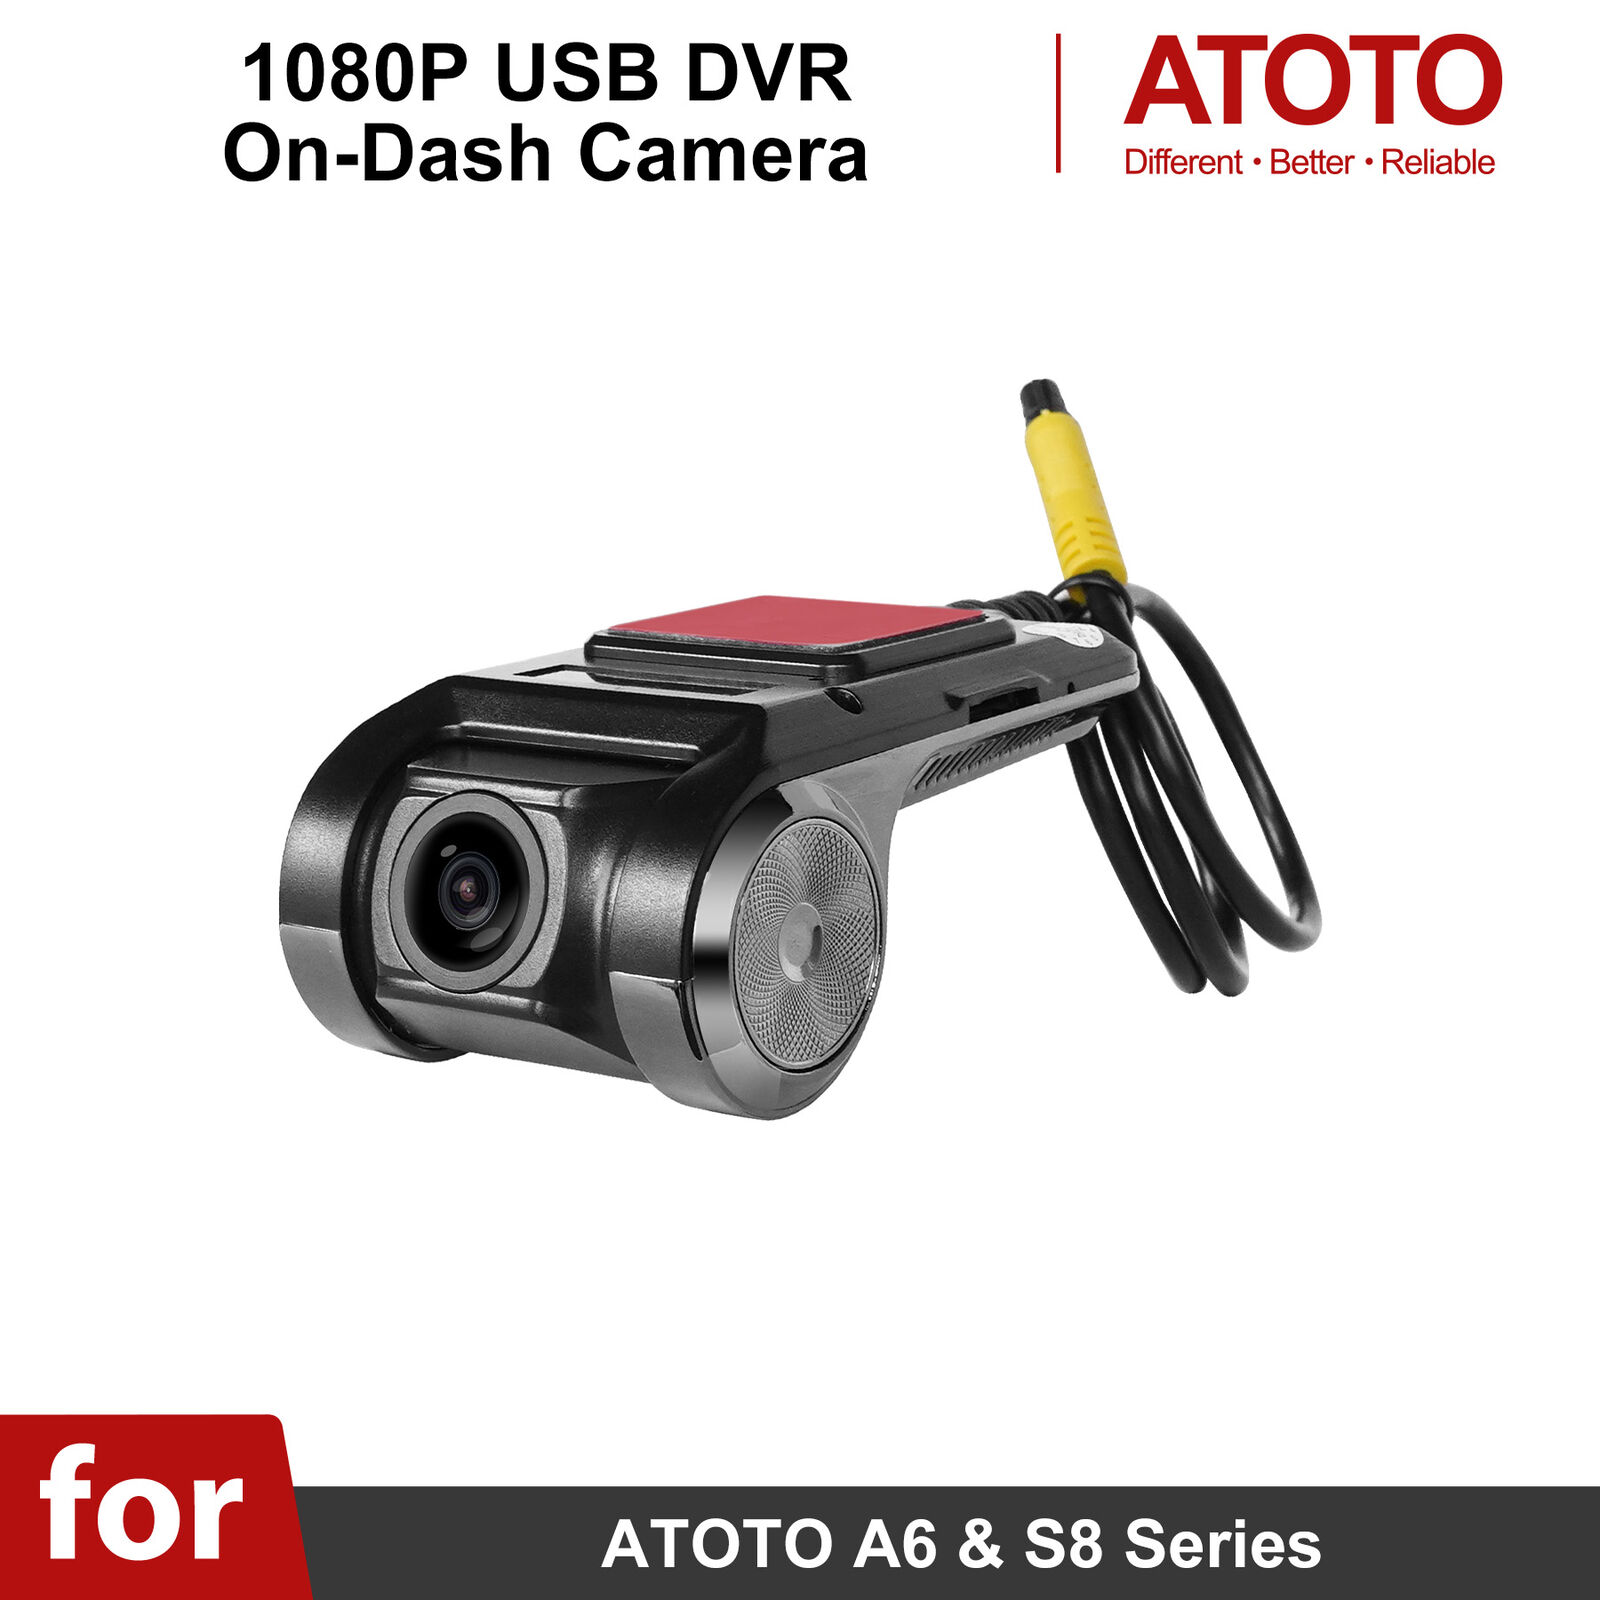 ATOTO 1080P USB DVR On-Dash Camera - Recording Video On Camera End for S8 A6